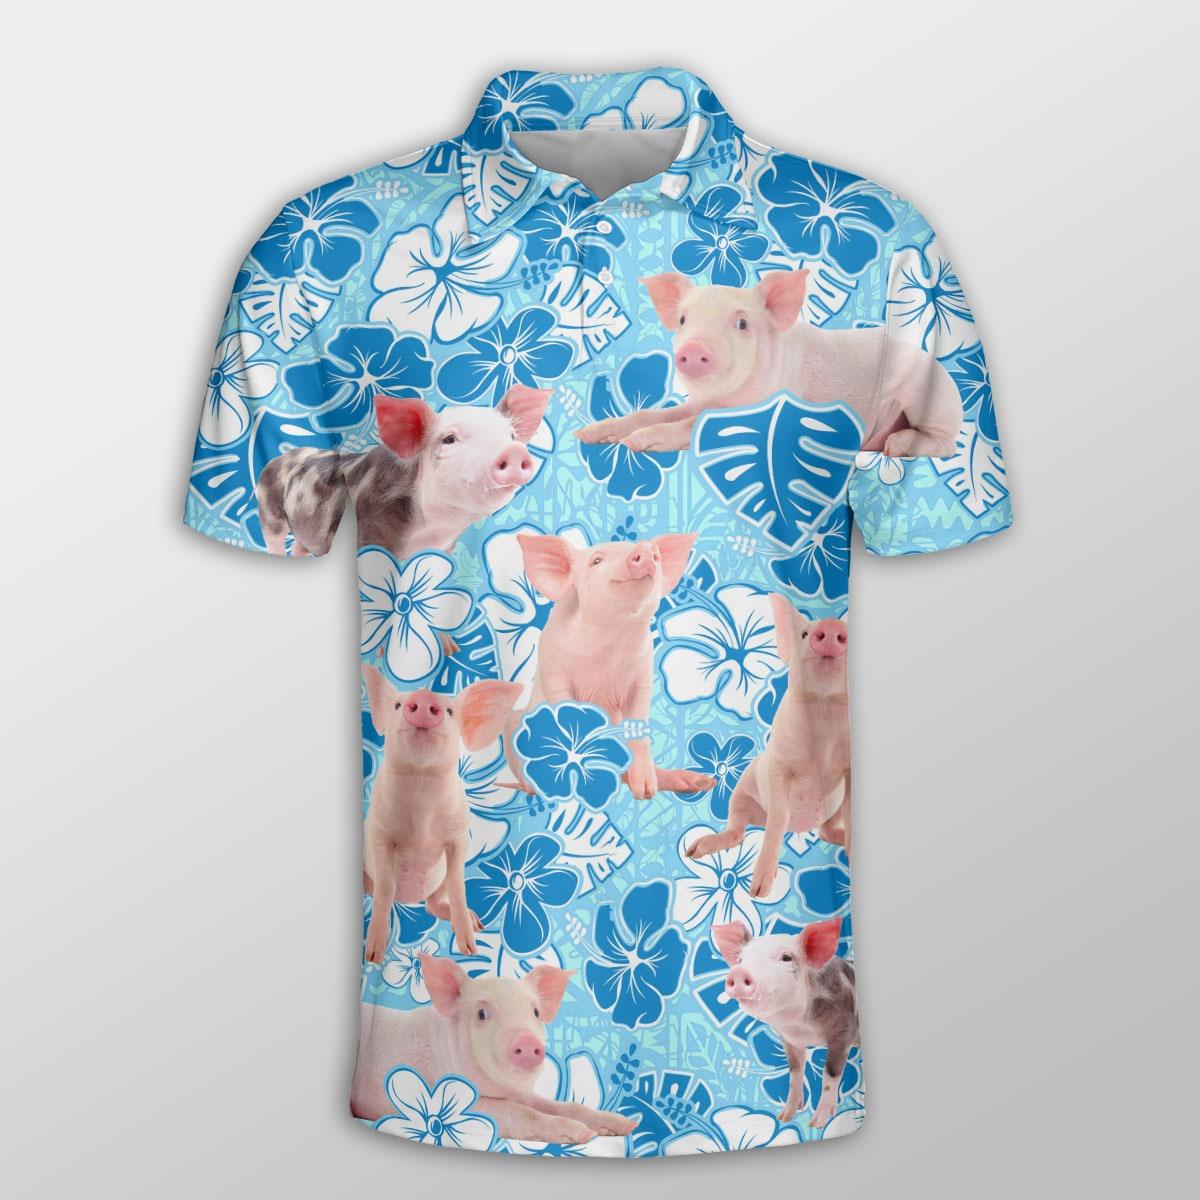 Pig Men Polo Shirt For Summer - Pig Blue Floral Pattern Button Shirt For Men - Perfect Gift For Pig Lovers, Cattle Lovers - Amzanimalsgift